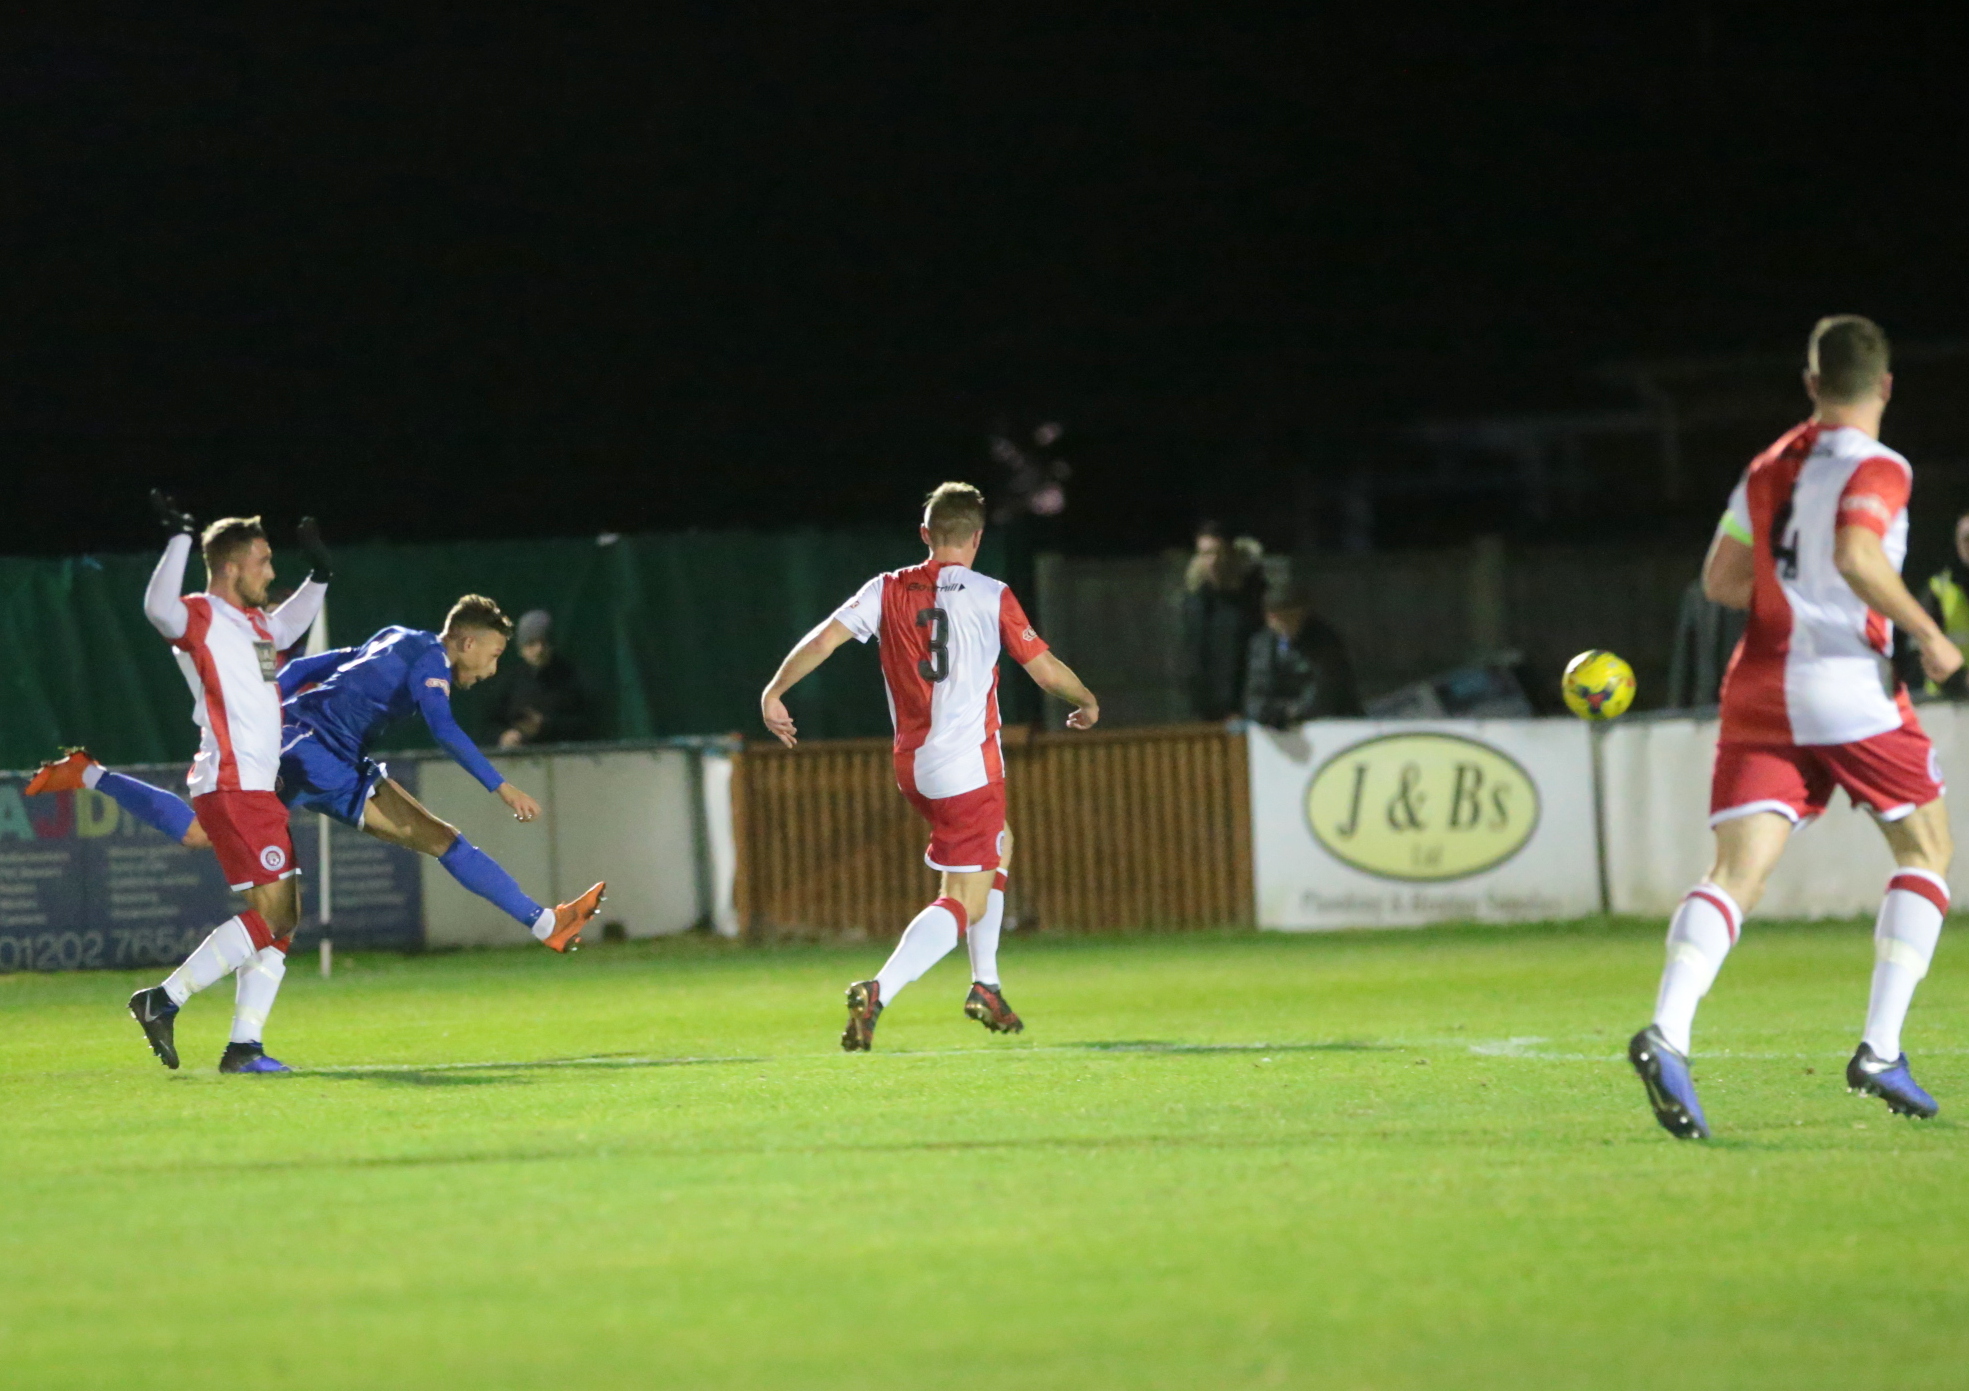 Ryan Campbell scored the first of our goals in the 5-2 win at Poole last January